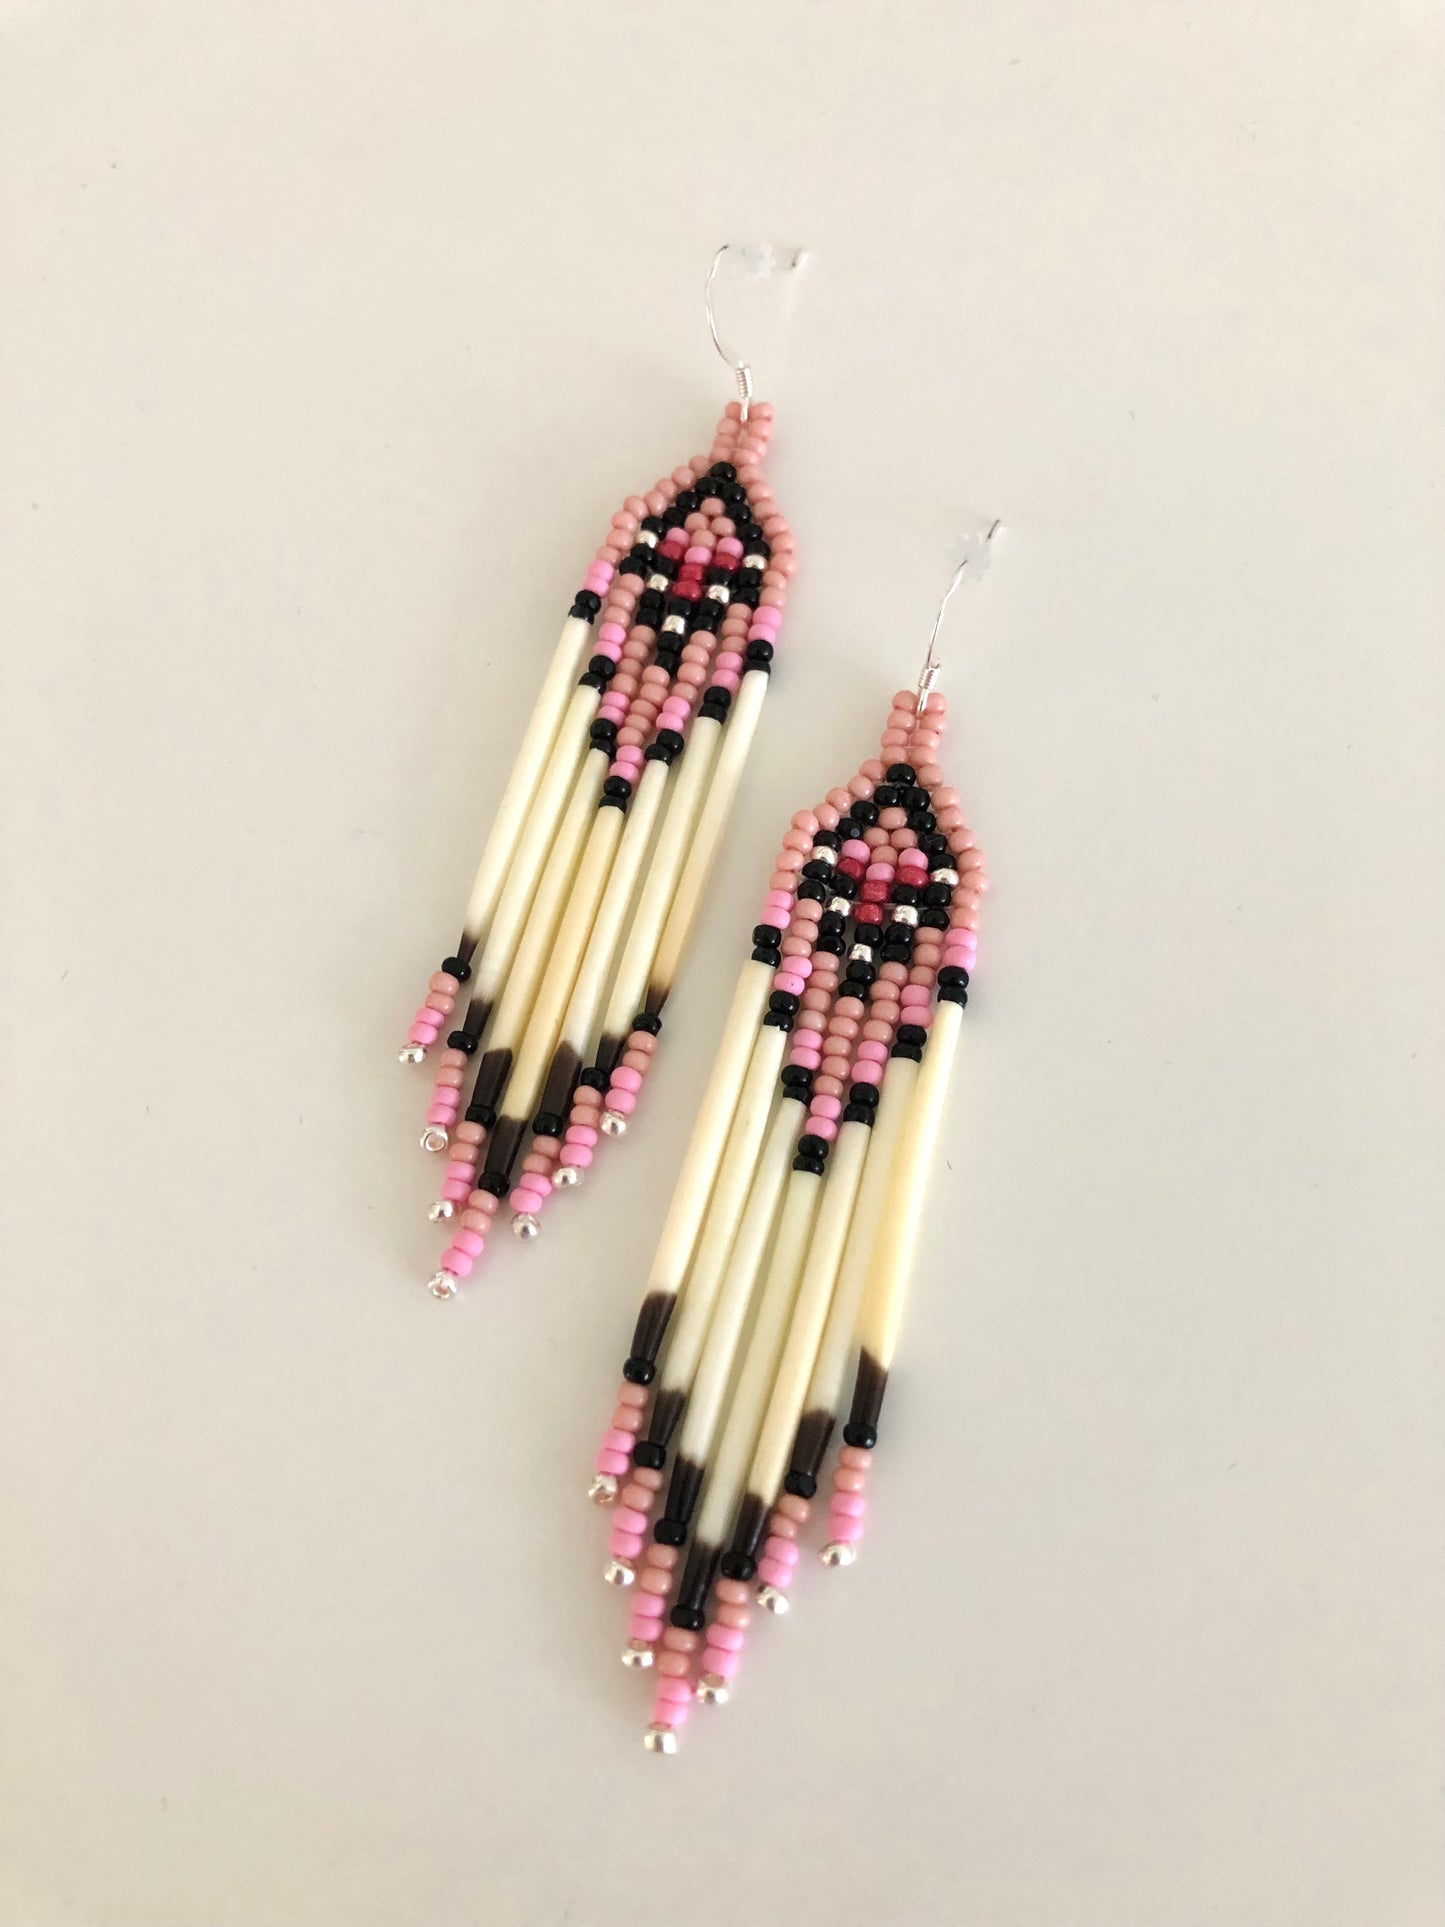 Porcupine Quill Earrings - Cheyenne Pink & Black